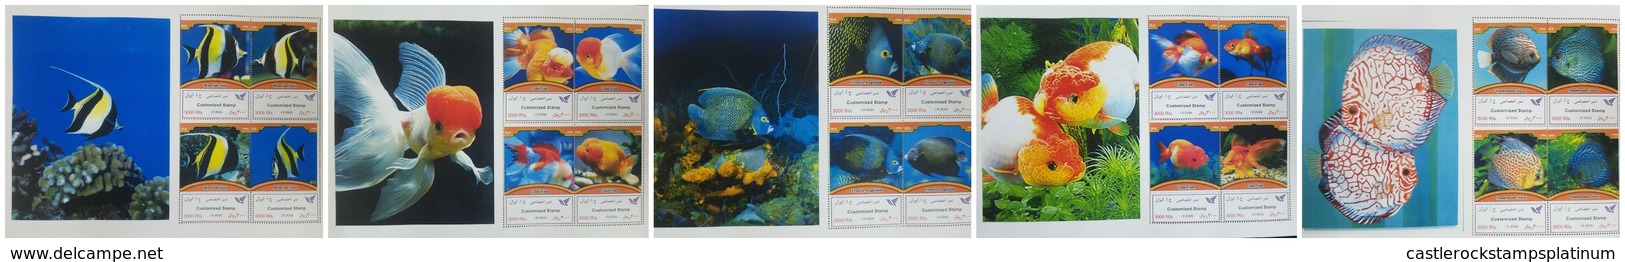 RO) 2018 IRAN - PERSIA-MIDDLE EAST, FISHES-EXOTIC FISHES -OF AQUARIUMS - SYMPHYSODON DISCUS-MOORISH IDOL- GOLD FISH -FRE - Iran